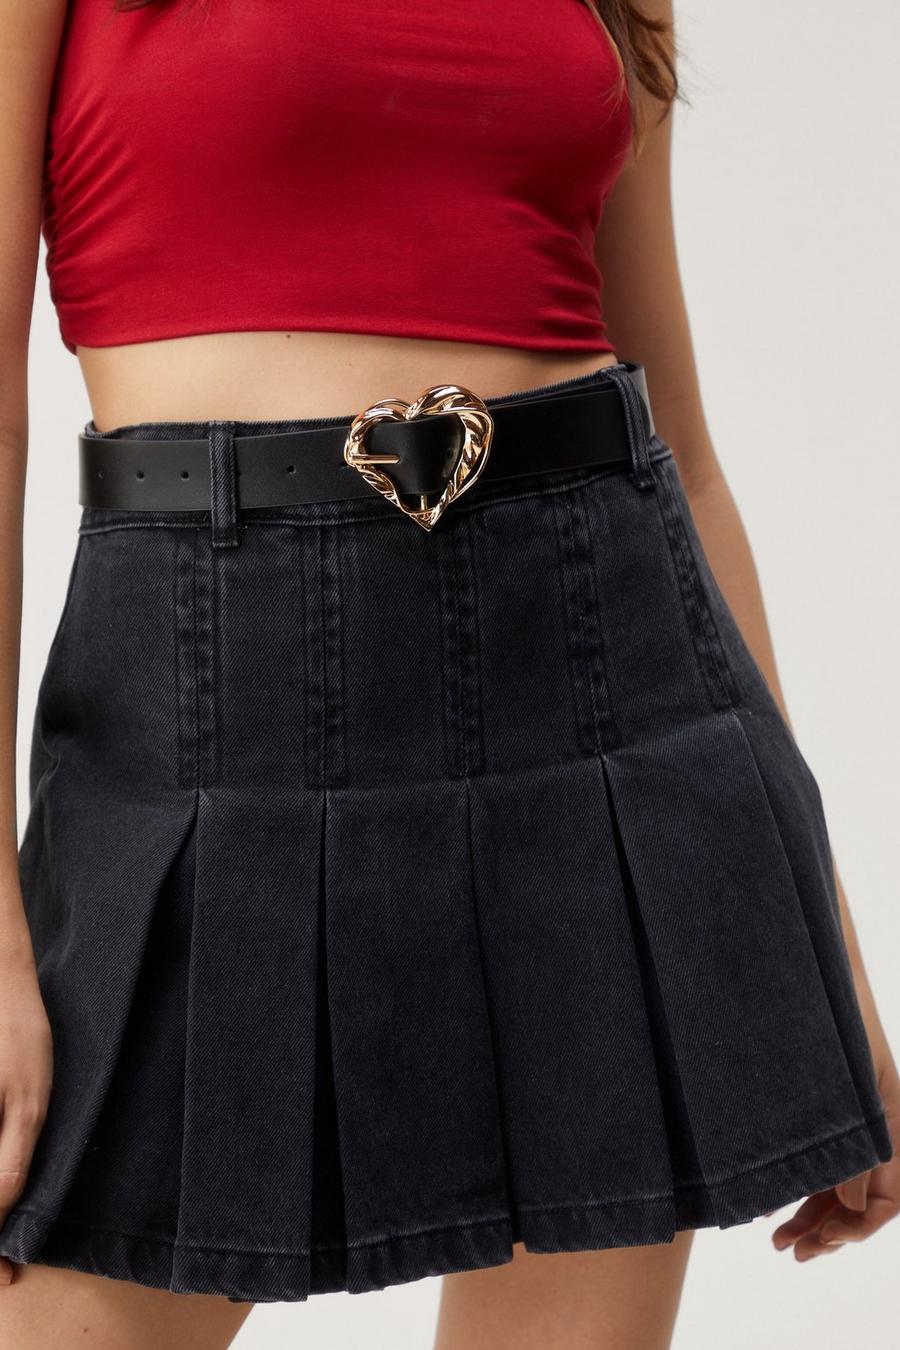 Hammered Heart Faux Leather Waist Belt